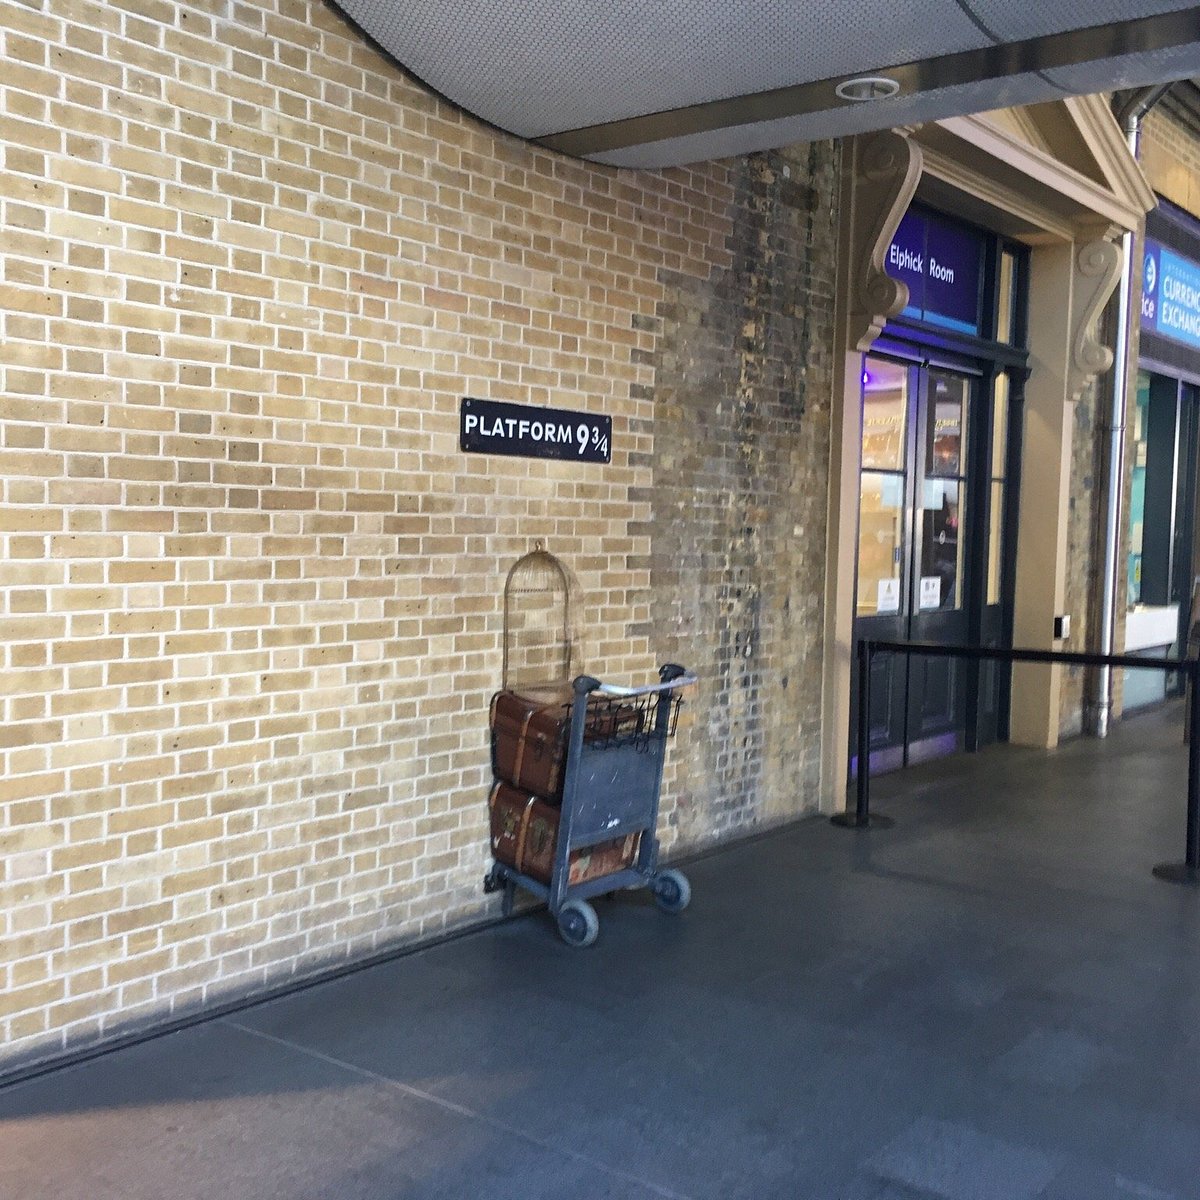 Head to platform 9 3/4 to go tho the Wizarding World with this awesome